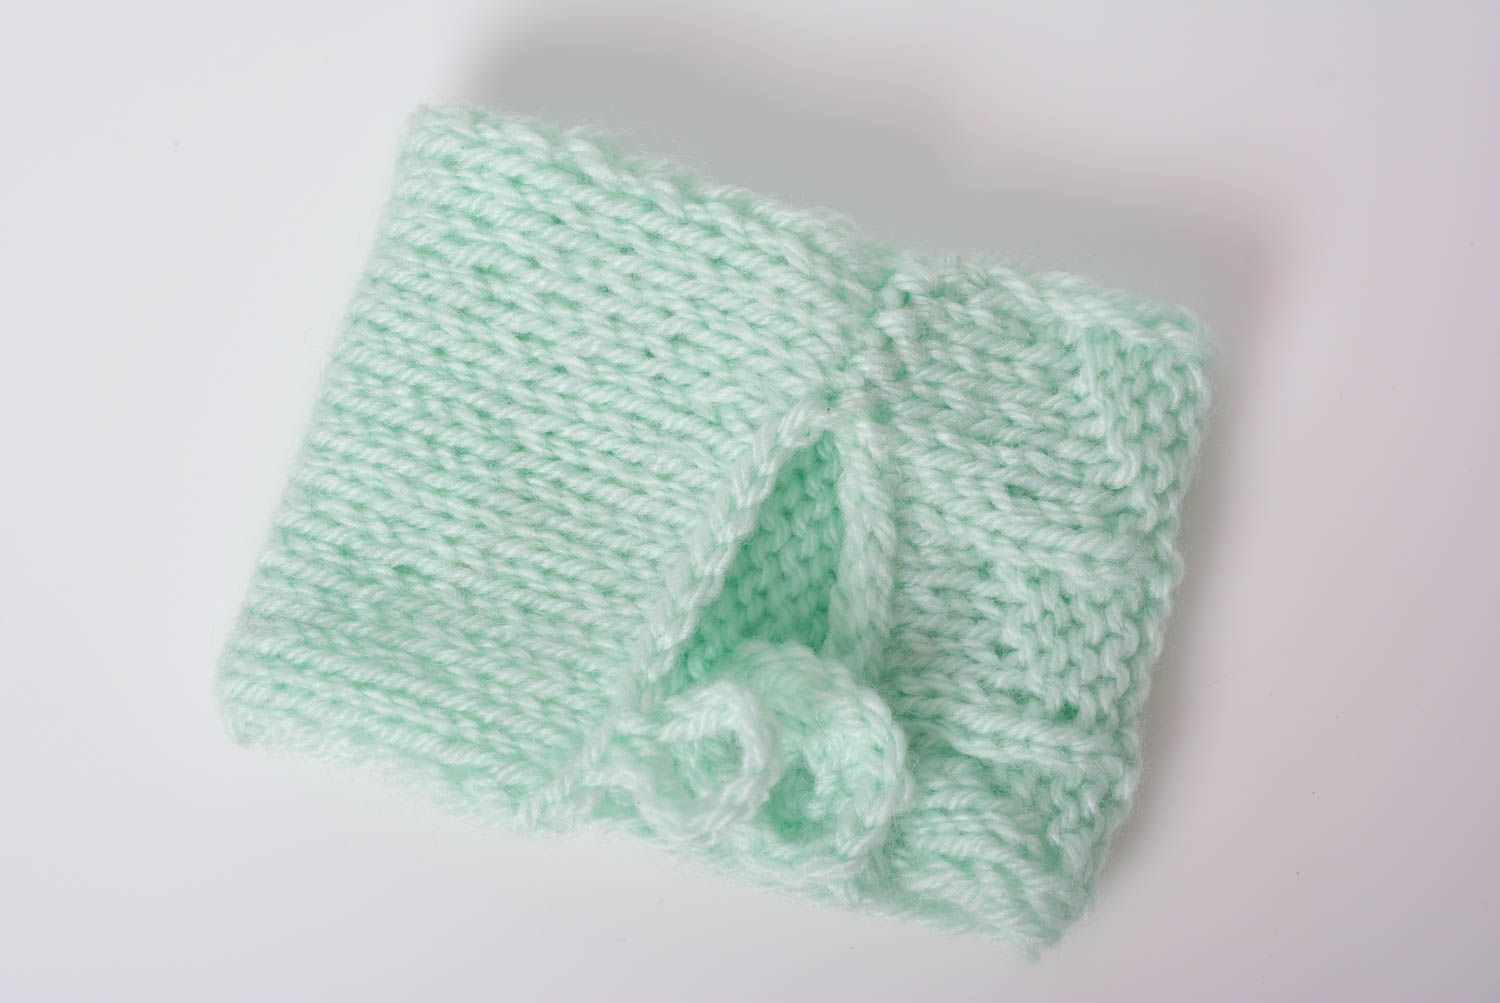 Handmade crocheted beautiful case for cup made of acrylic yarns of mint color photo 4